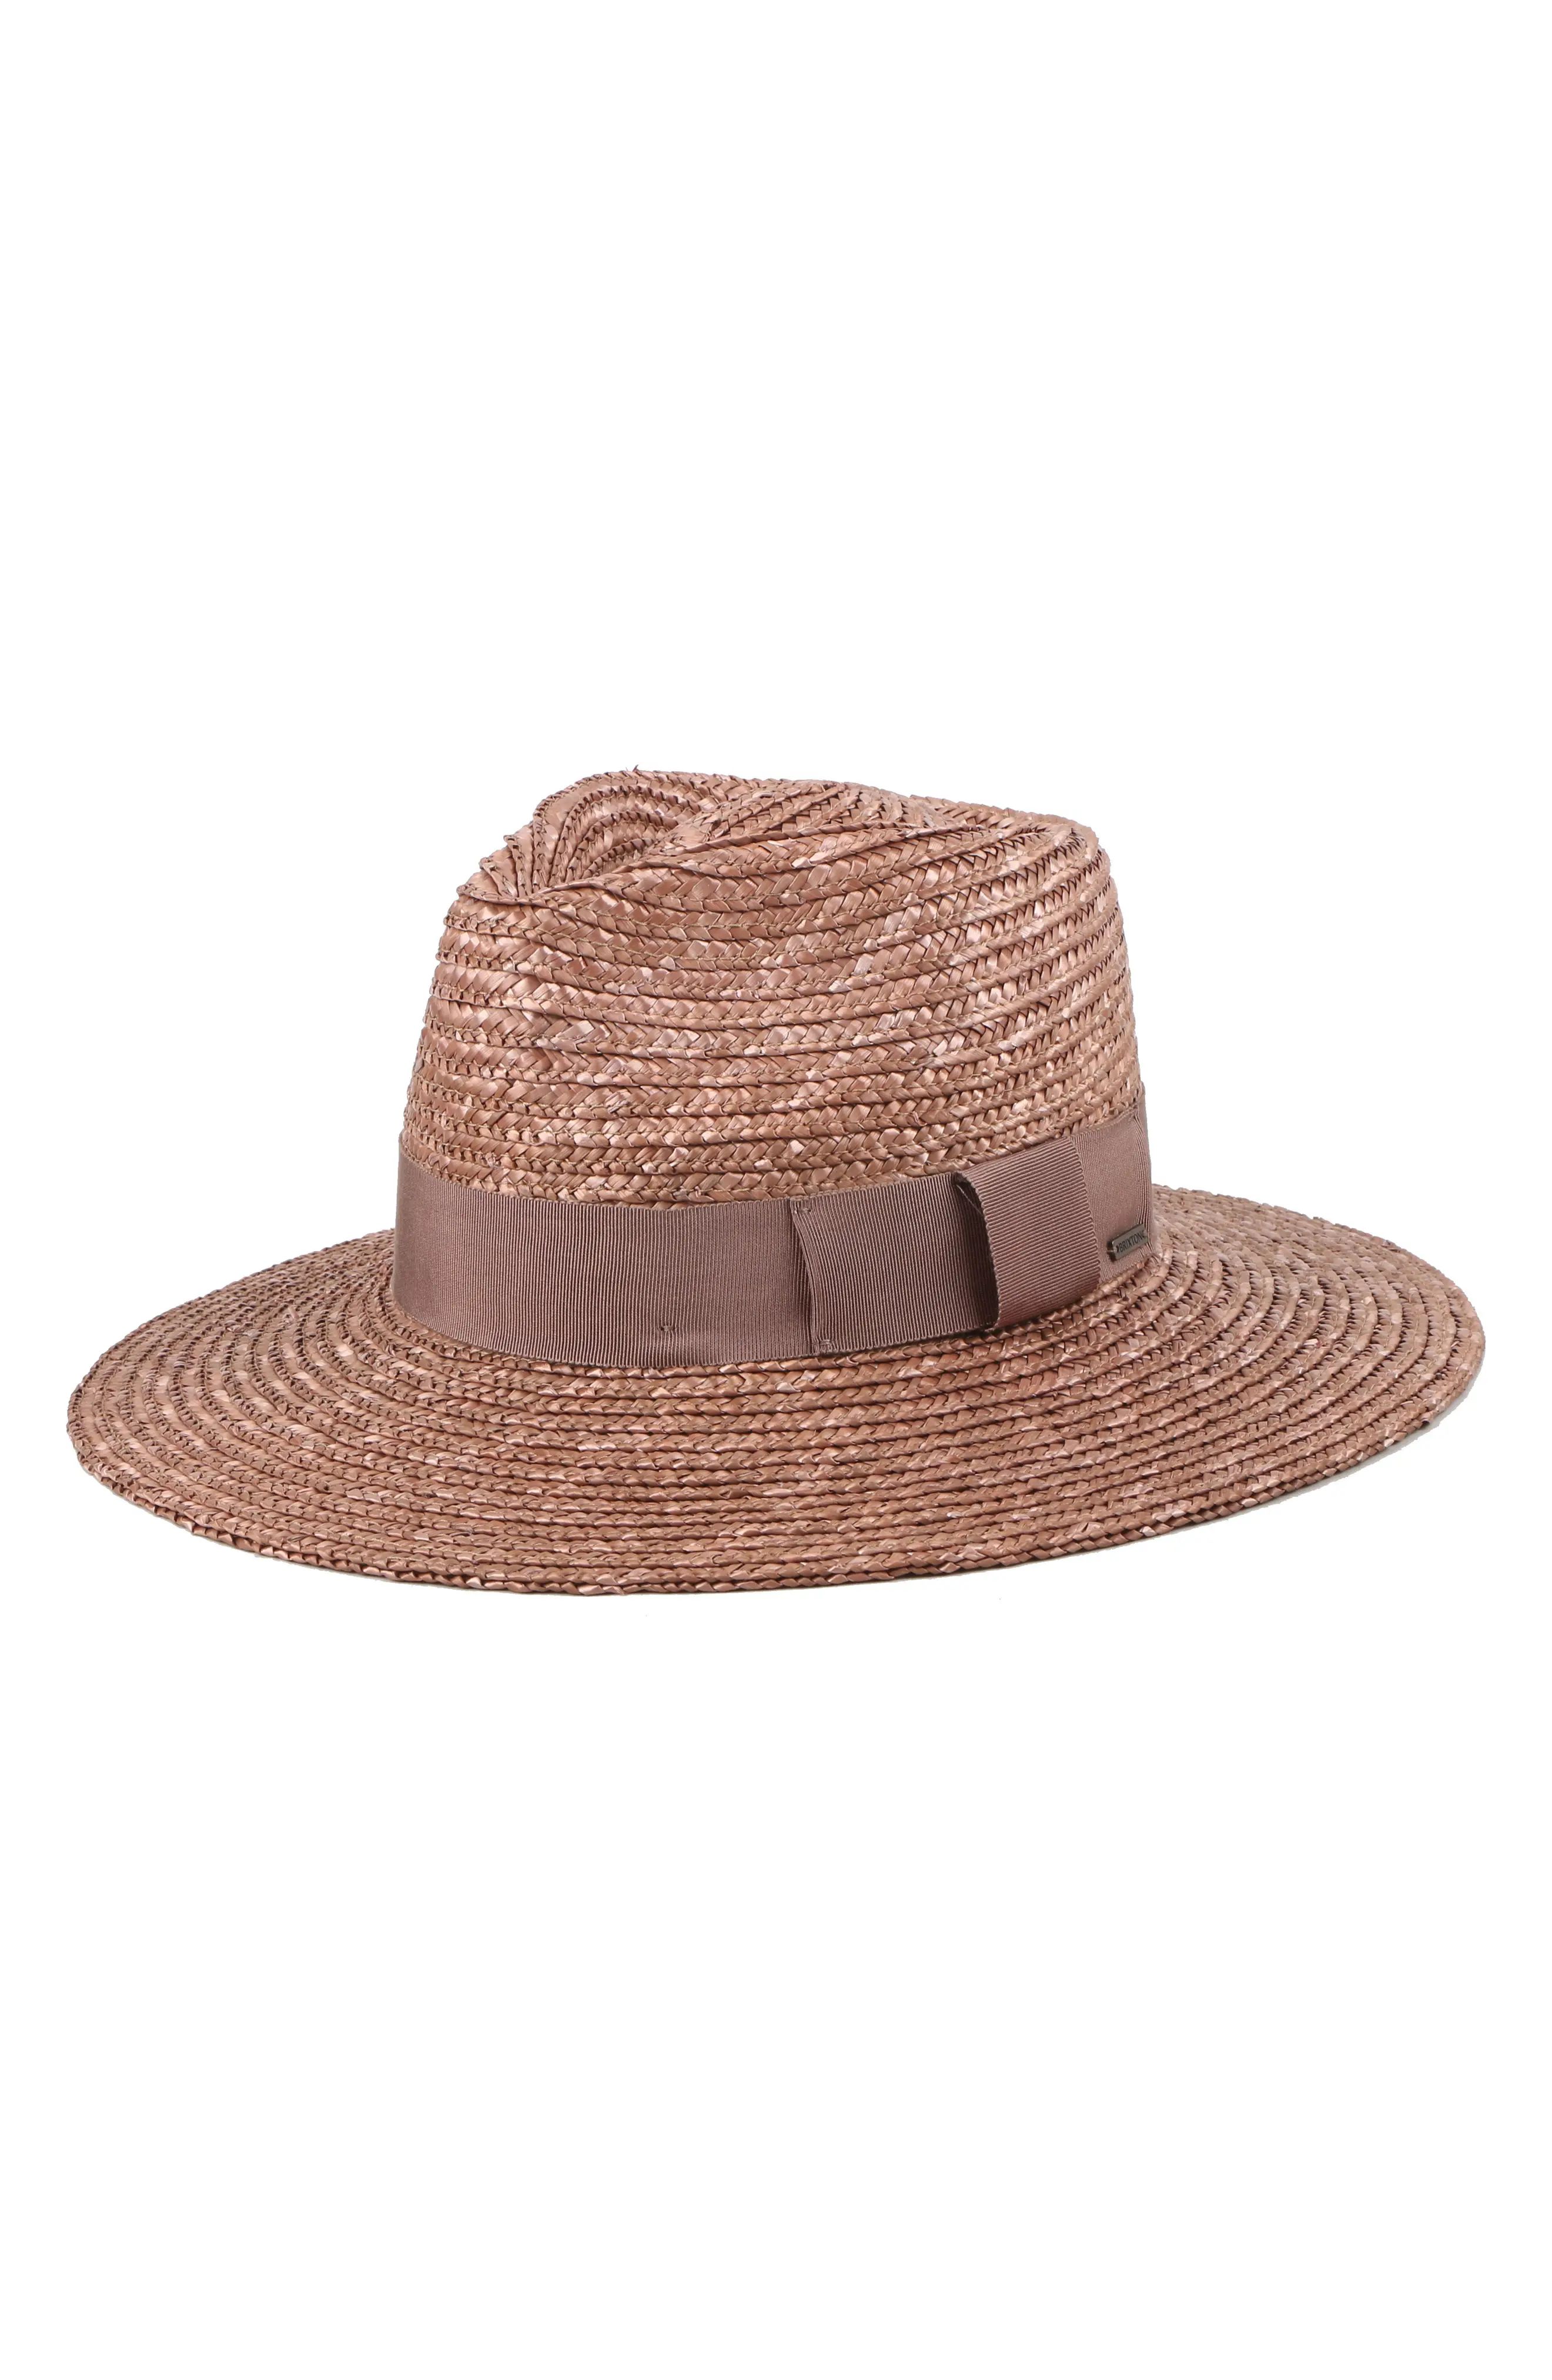 Brixton Joanna Straw Hat in Lilac at Nordstrom, Size X-Small | Nordstrom